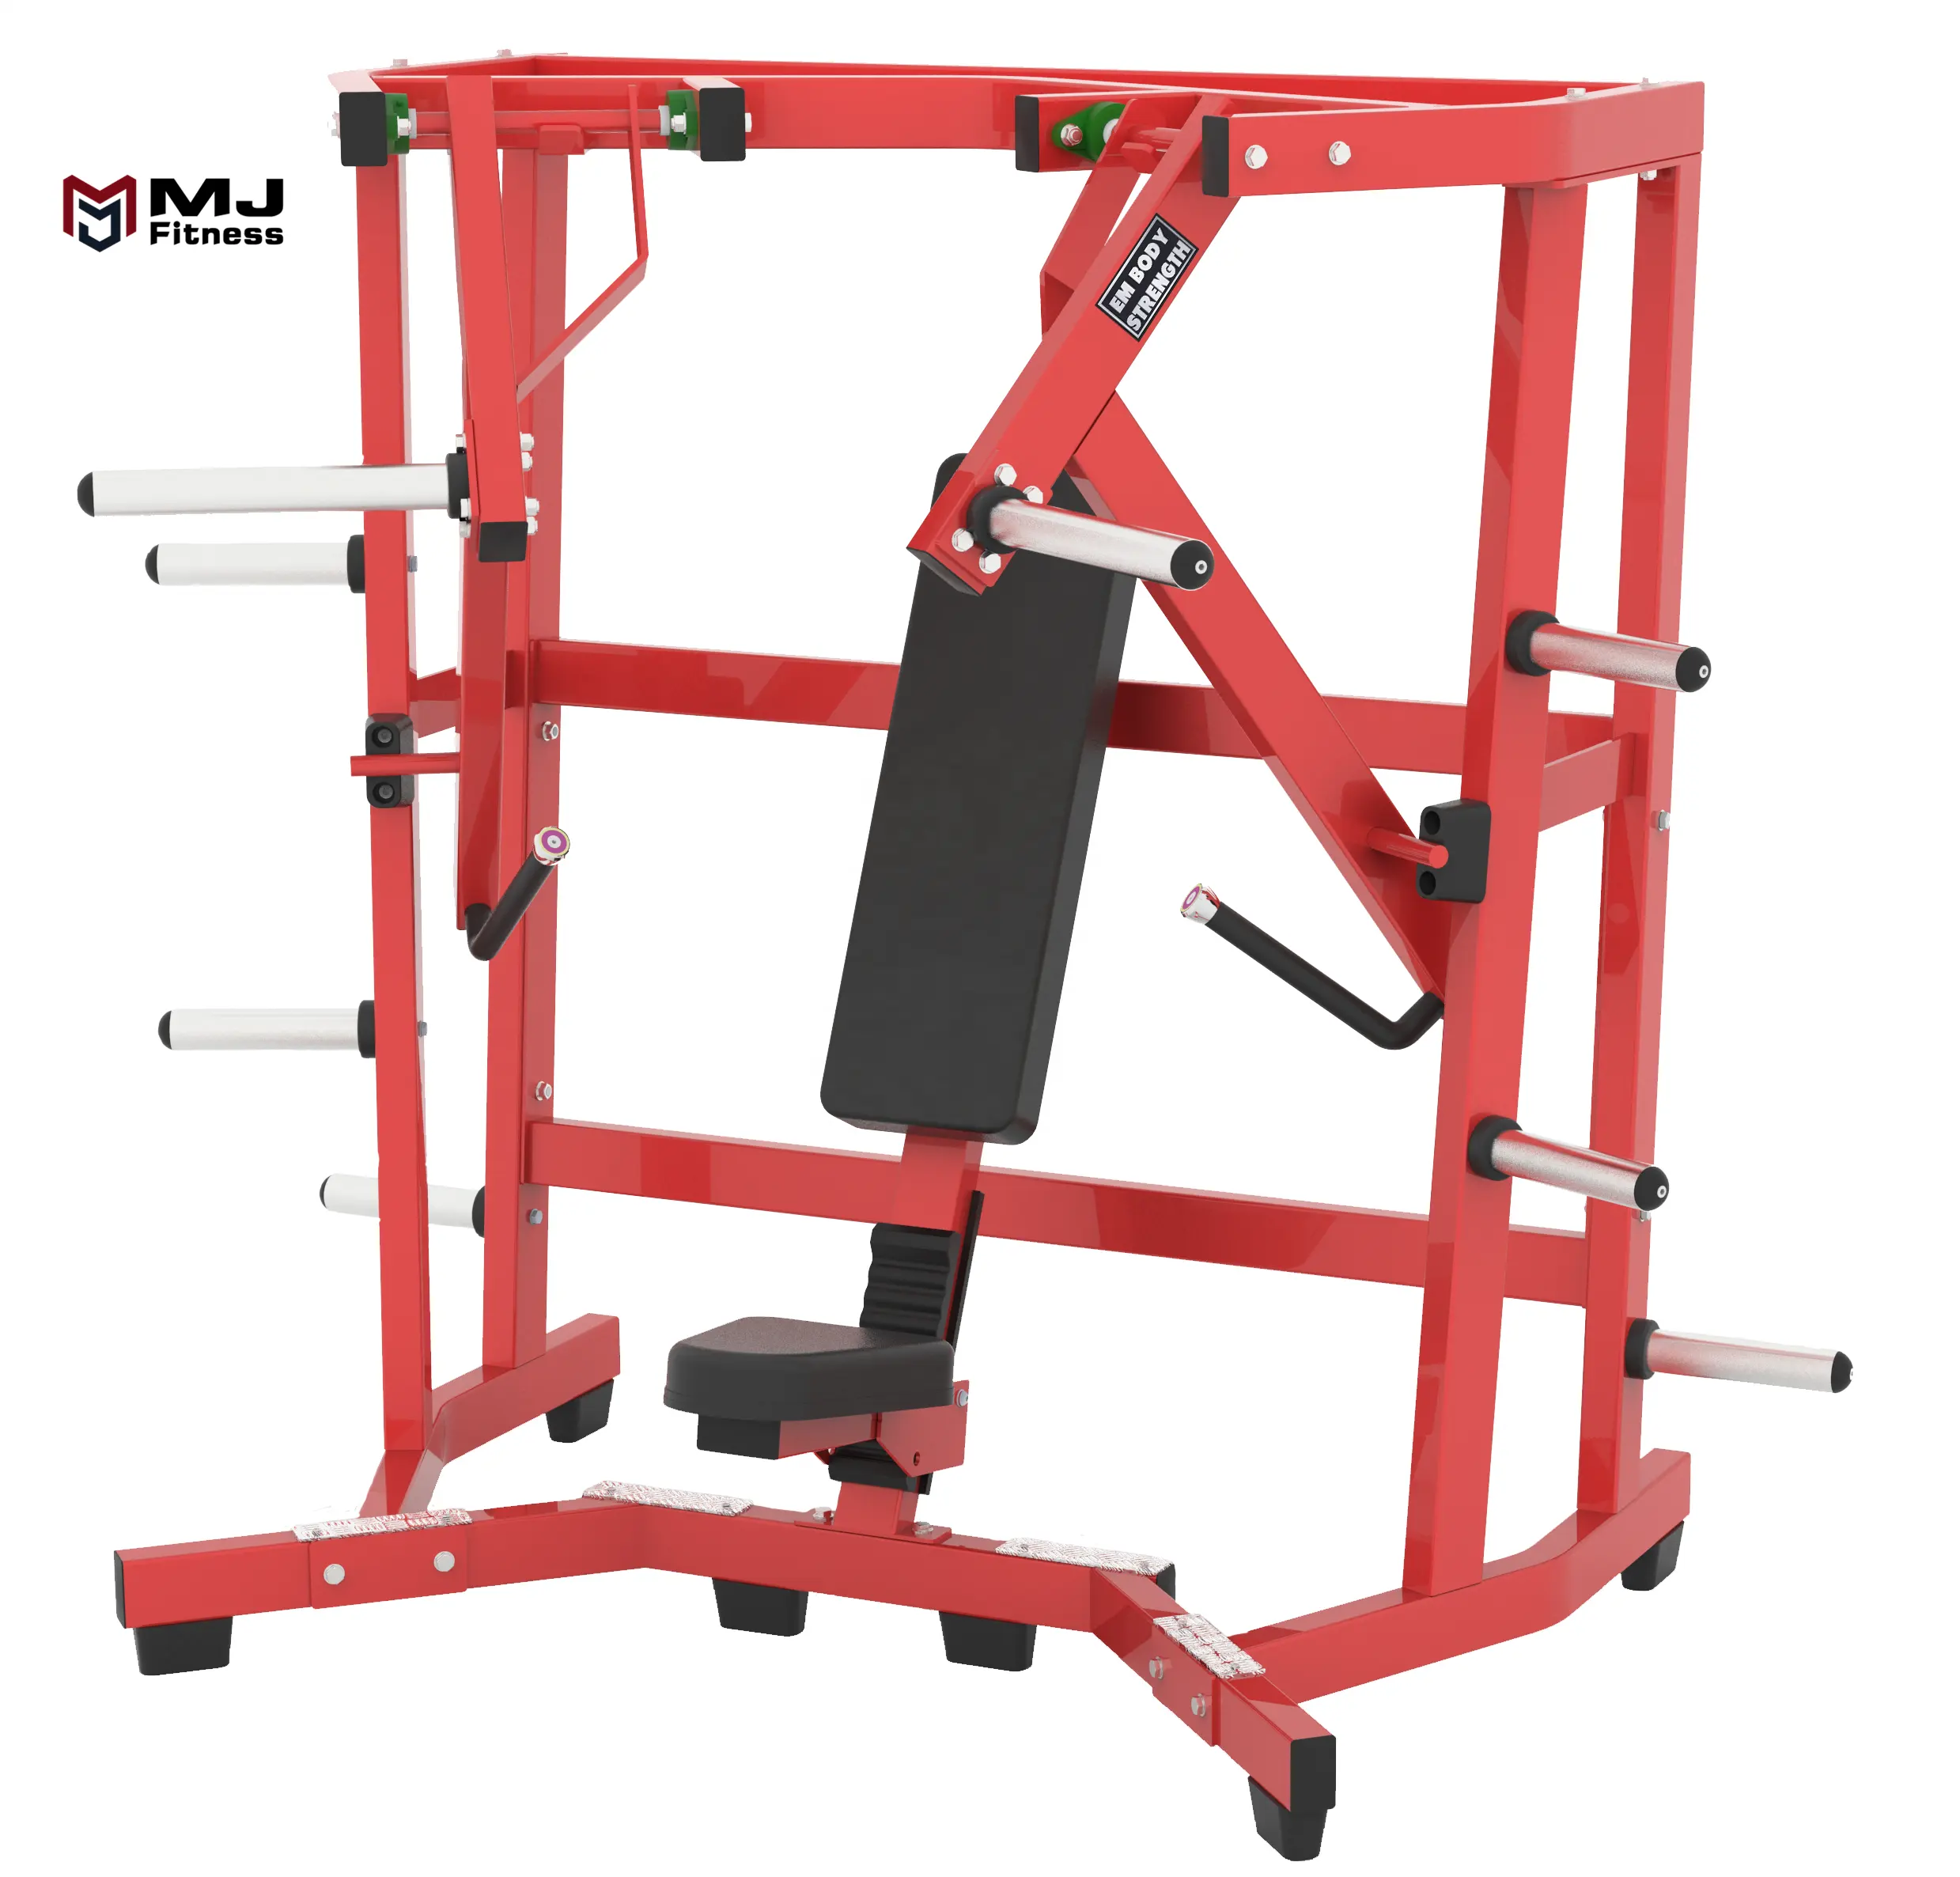 Newest Hammer Strength Rack free weights Fitness Commercial Equipment Iso-Lateral Incline Chest Press